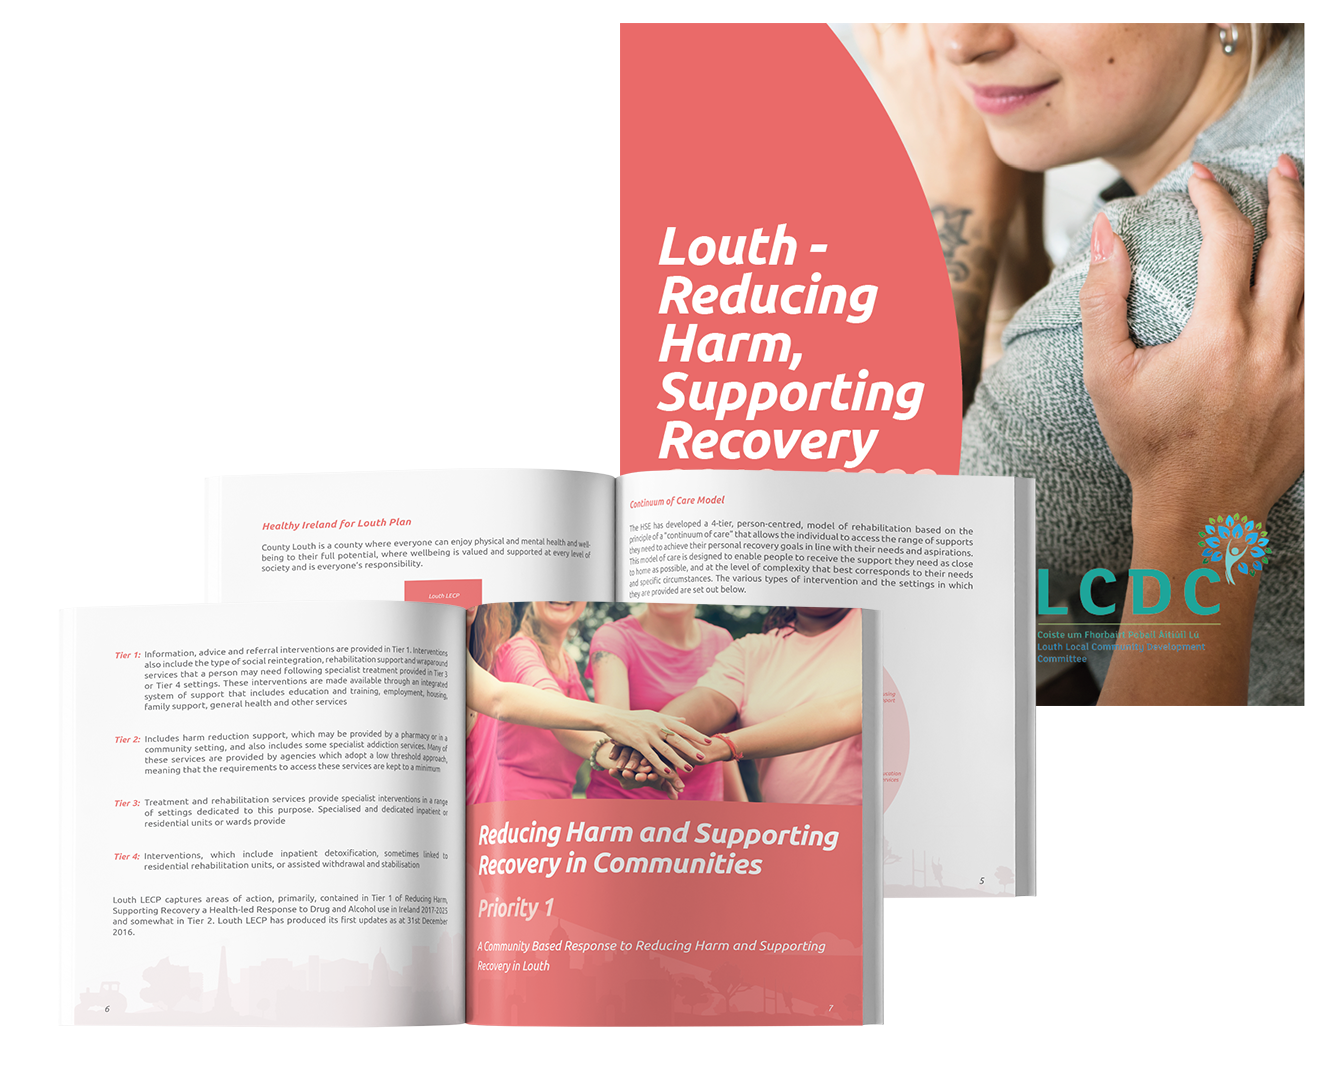 Creative Solutions for Government Publications - Louth Reducing Harm, Supporting Recovery Brochure Mockup - Graphic Design by The Digital Bakery Creative Agency in Dundalk Louth